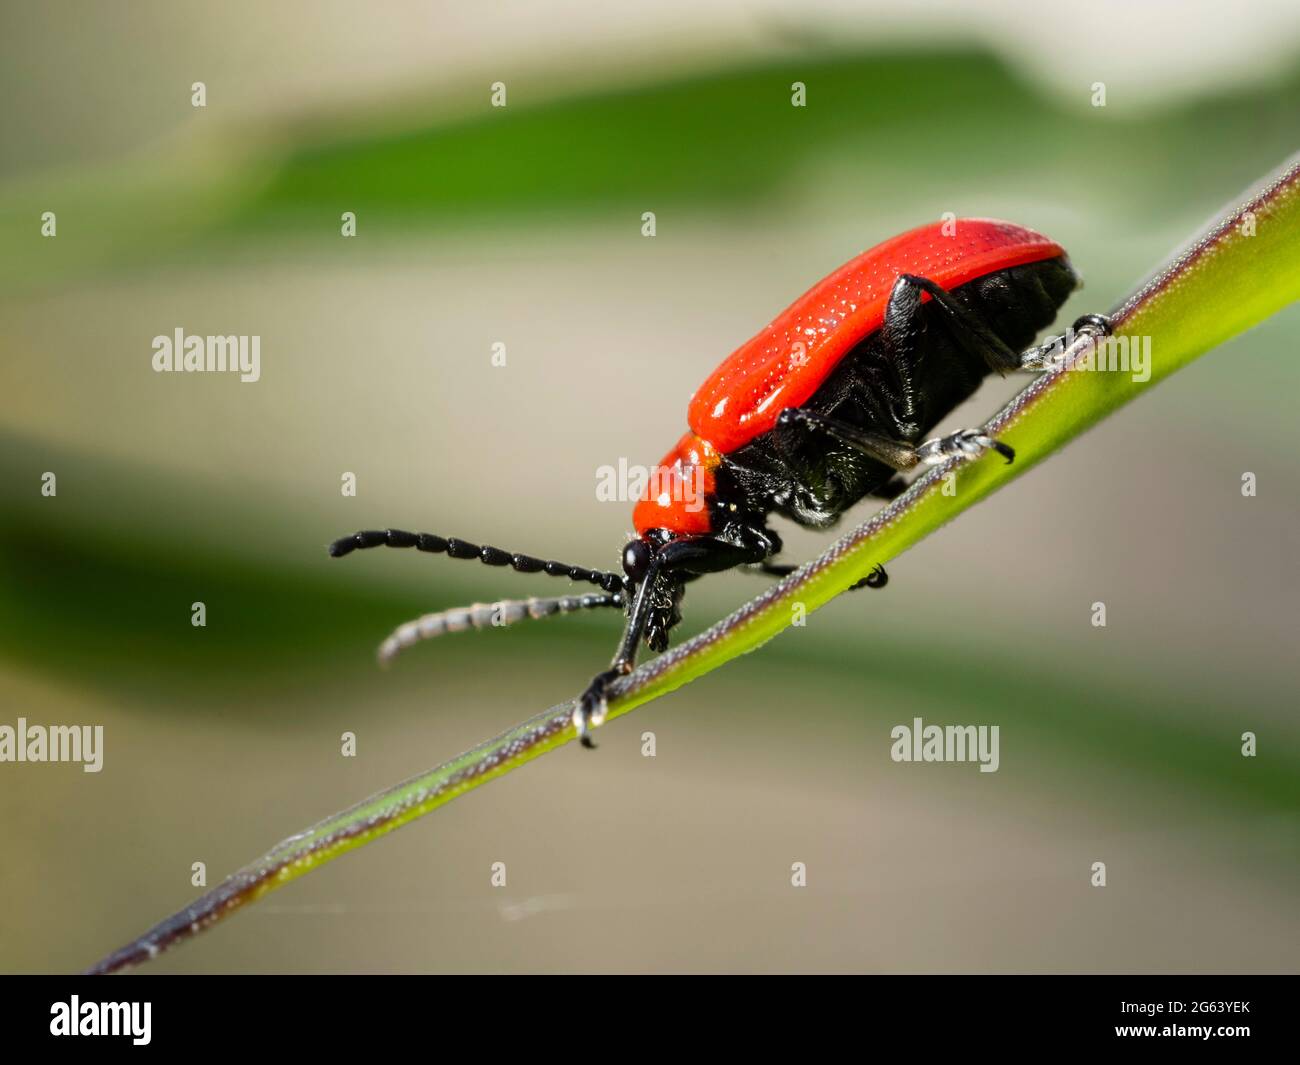 Adult lily beetle, Lilioceris lilii, a pest species of lilies and fritillaries, in a UK garden Stock Photo